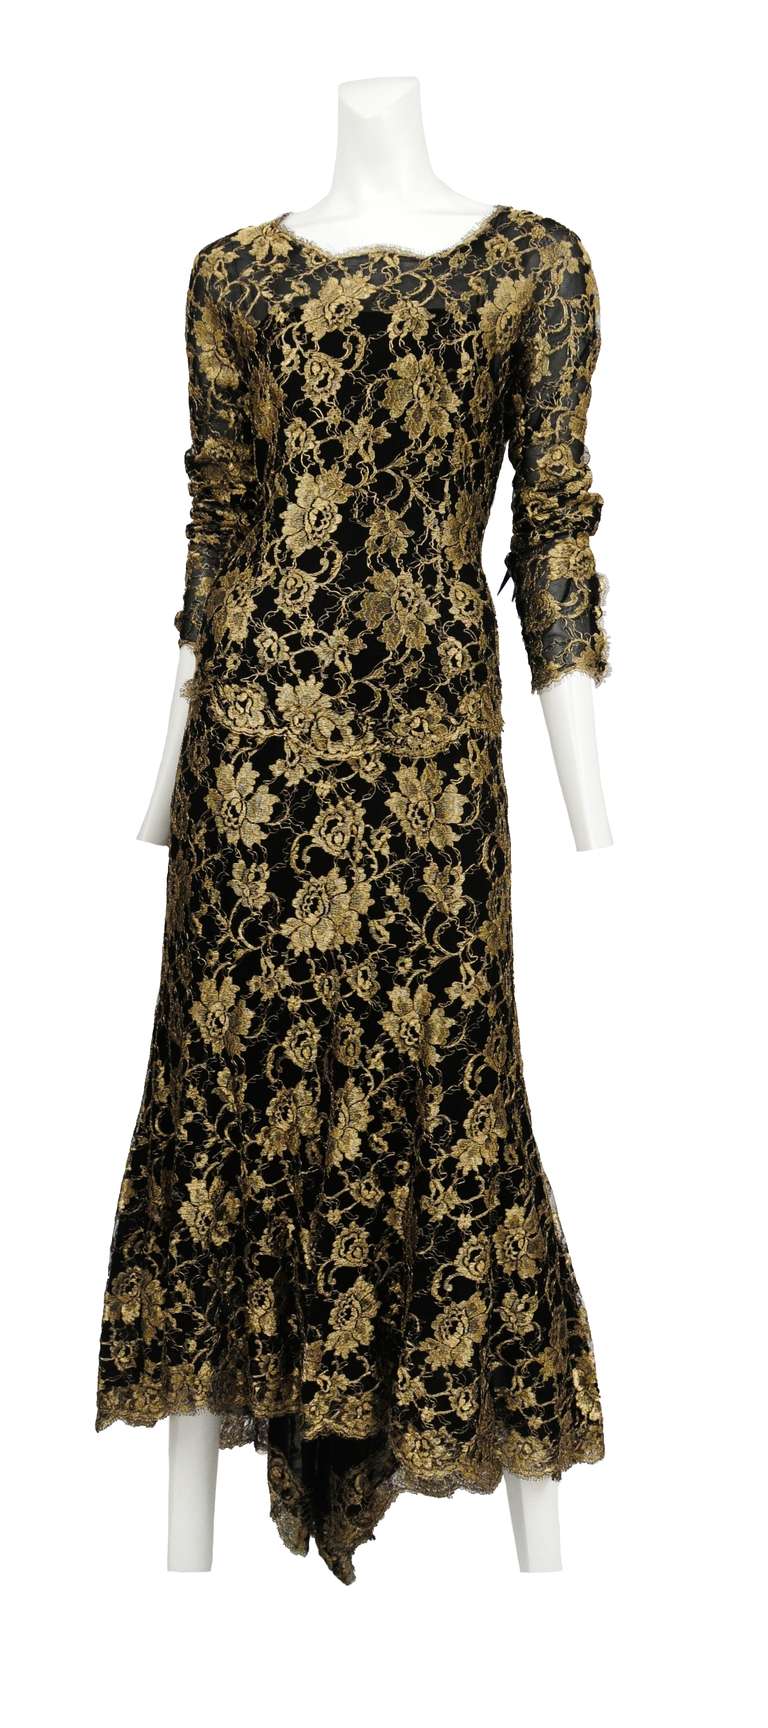 Gold and Black floral lace long sleeve gown with scalloped hem full skirt and fitted bodice.